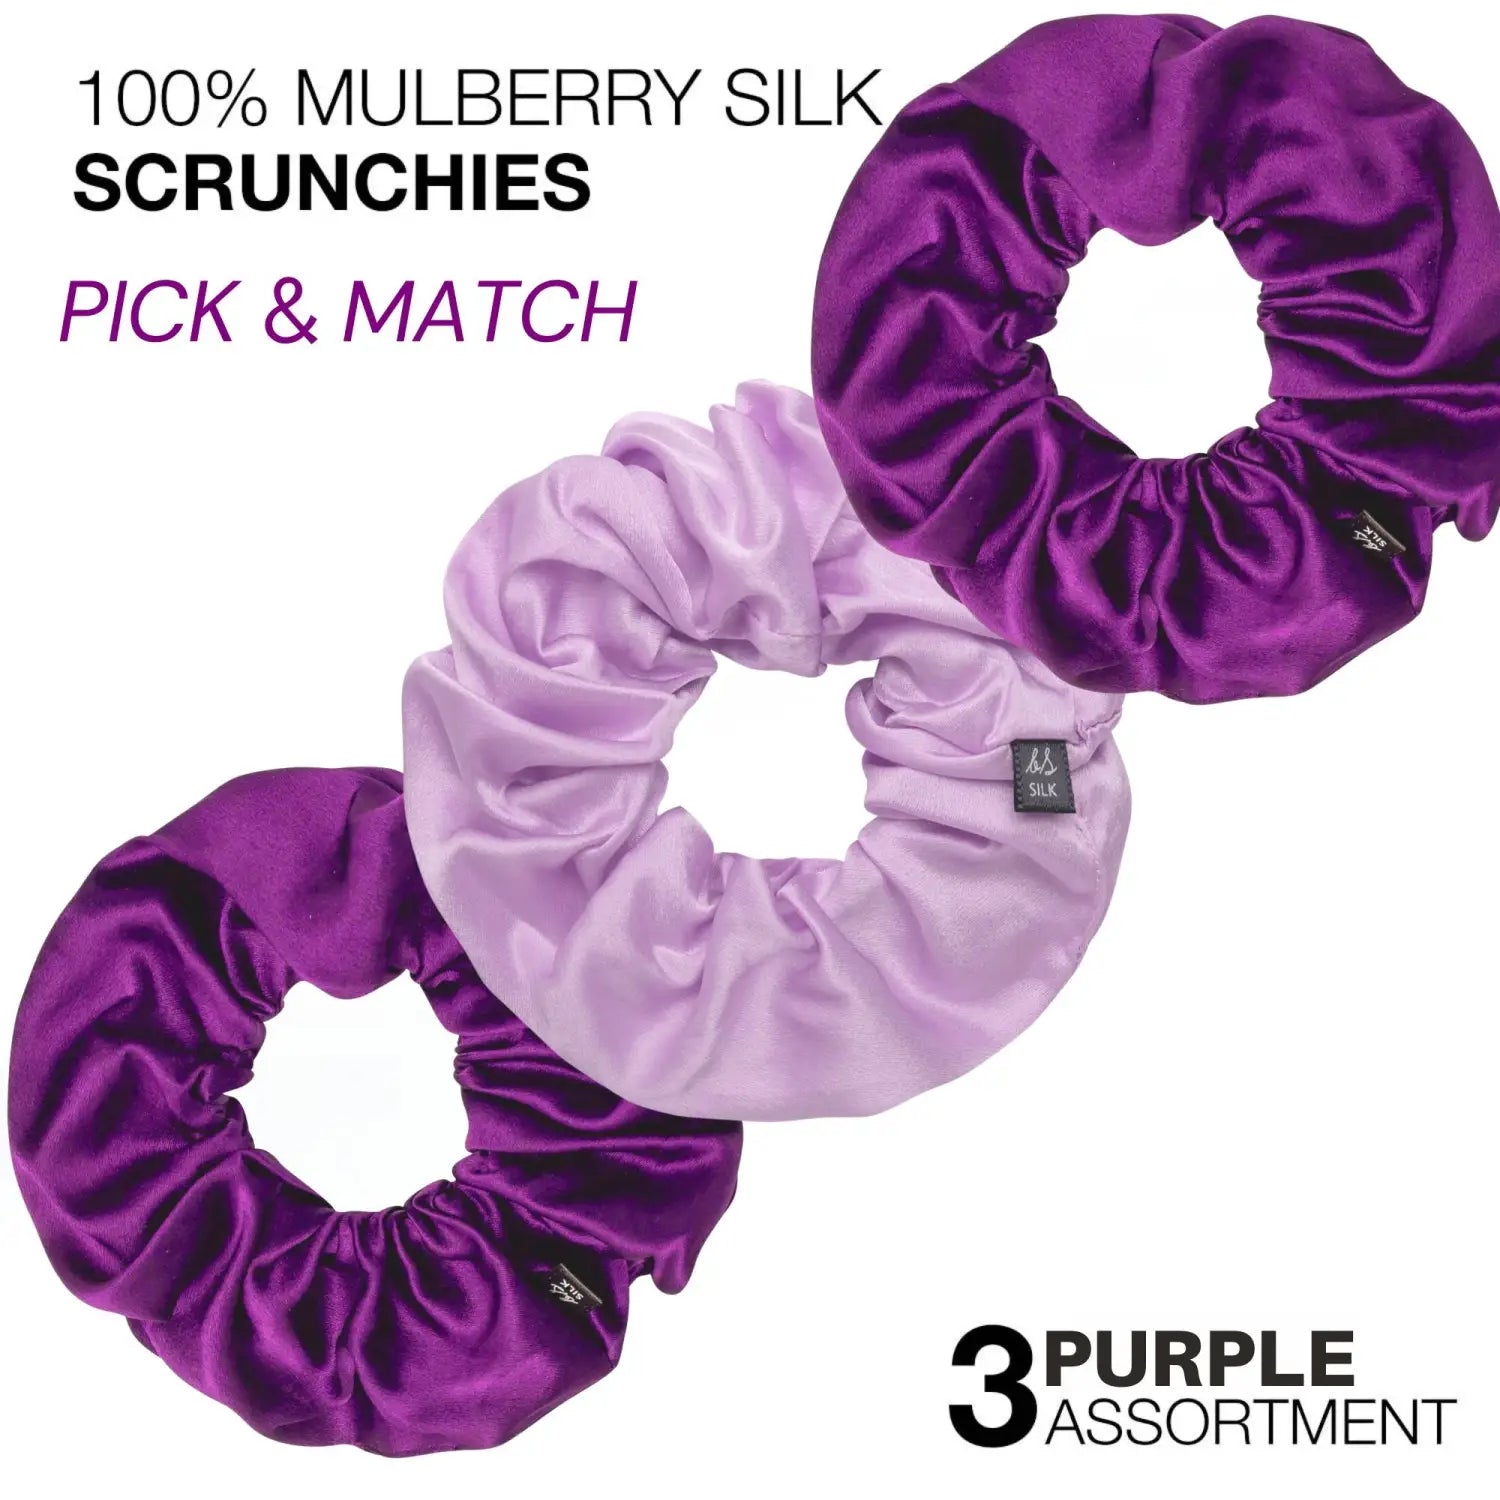 Mulberry Silk Hair Scrunchies: Large 3-Piece Set - purple and white scrunchies with black tag